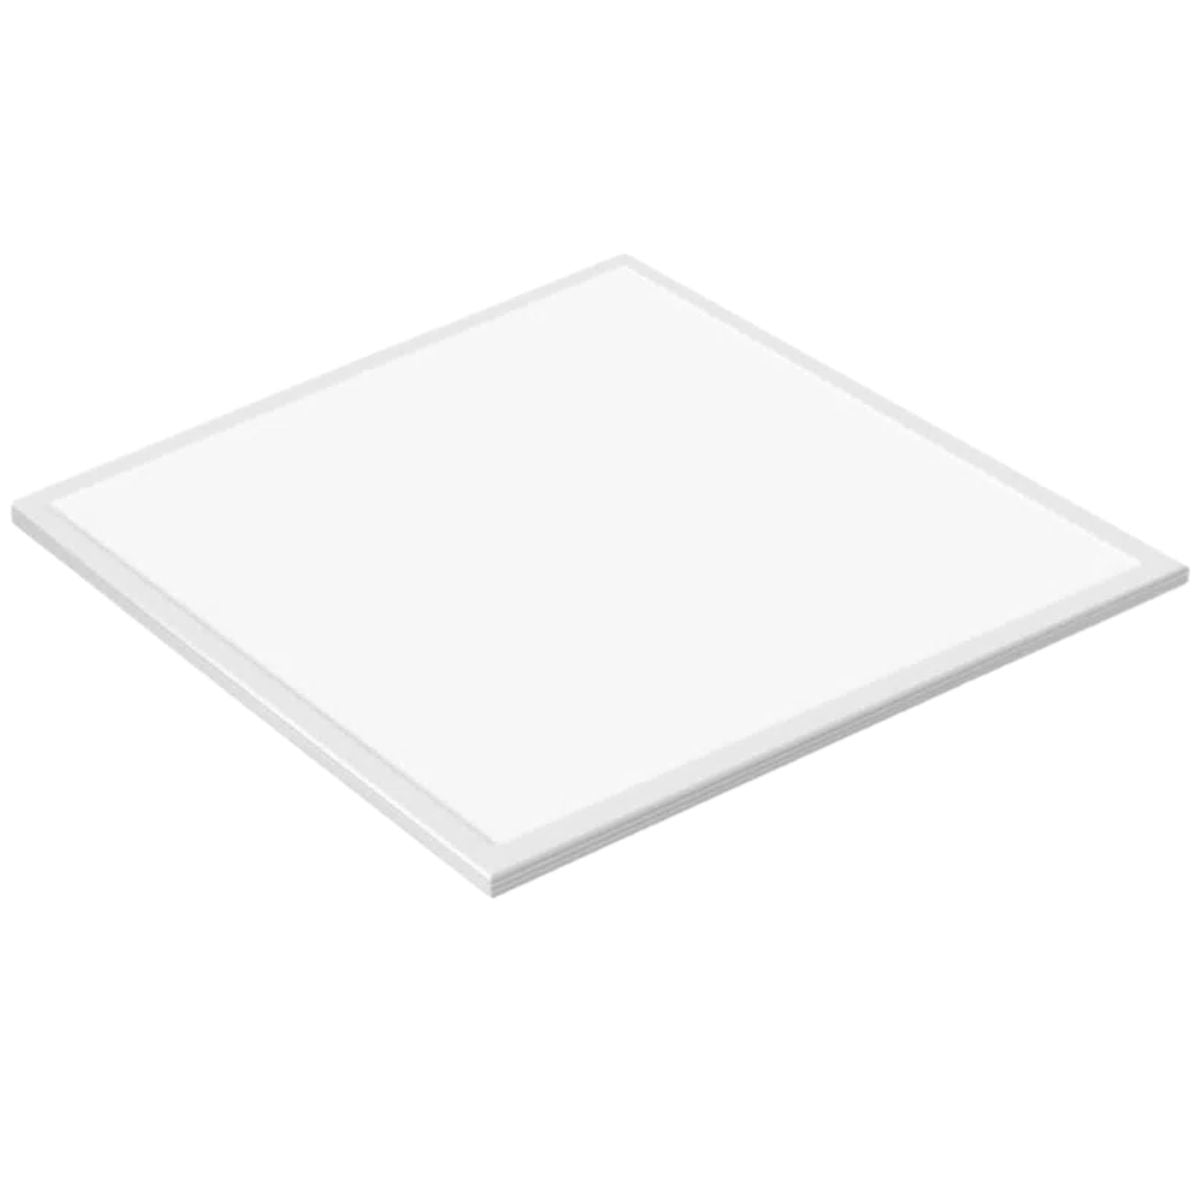 D-Tec LED Panel with Dimmer LP50 (9128305033526)